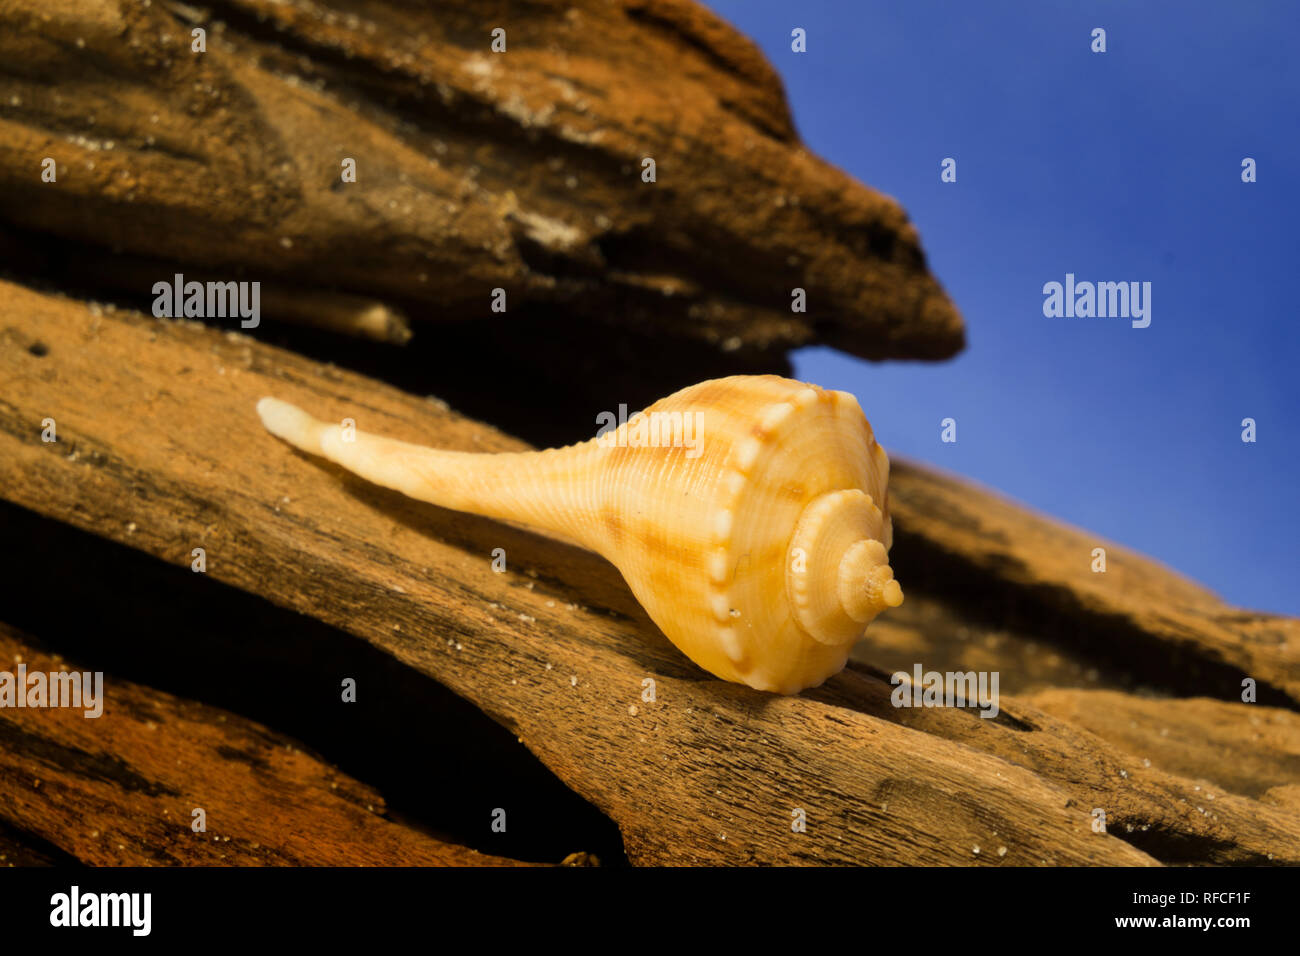 Whelk shell displayed on a piece of driftwood, both found in the Gulf of Mexico at Gulf Shores, Alabama. Stock Photo